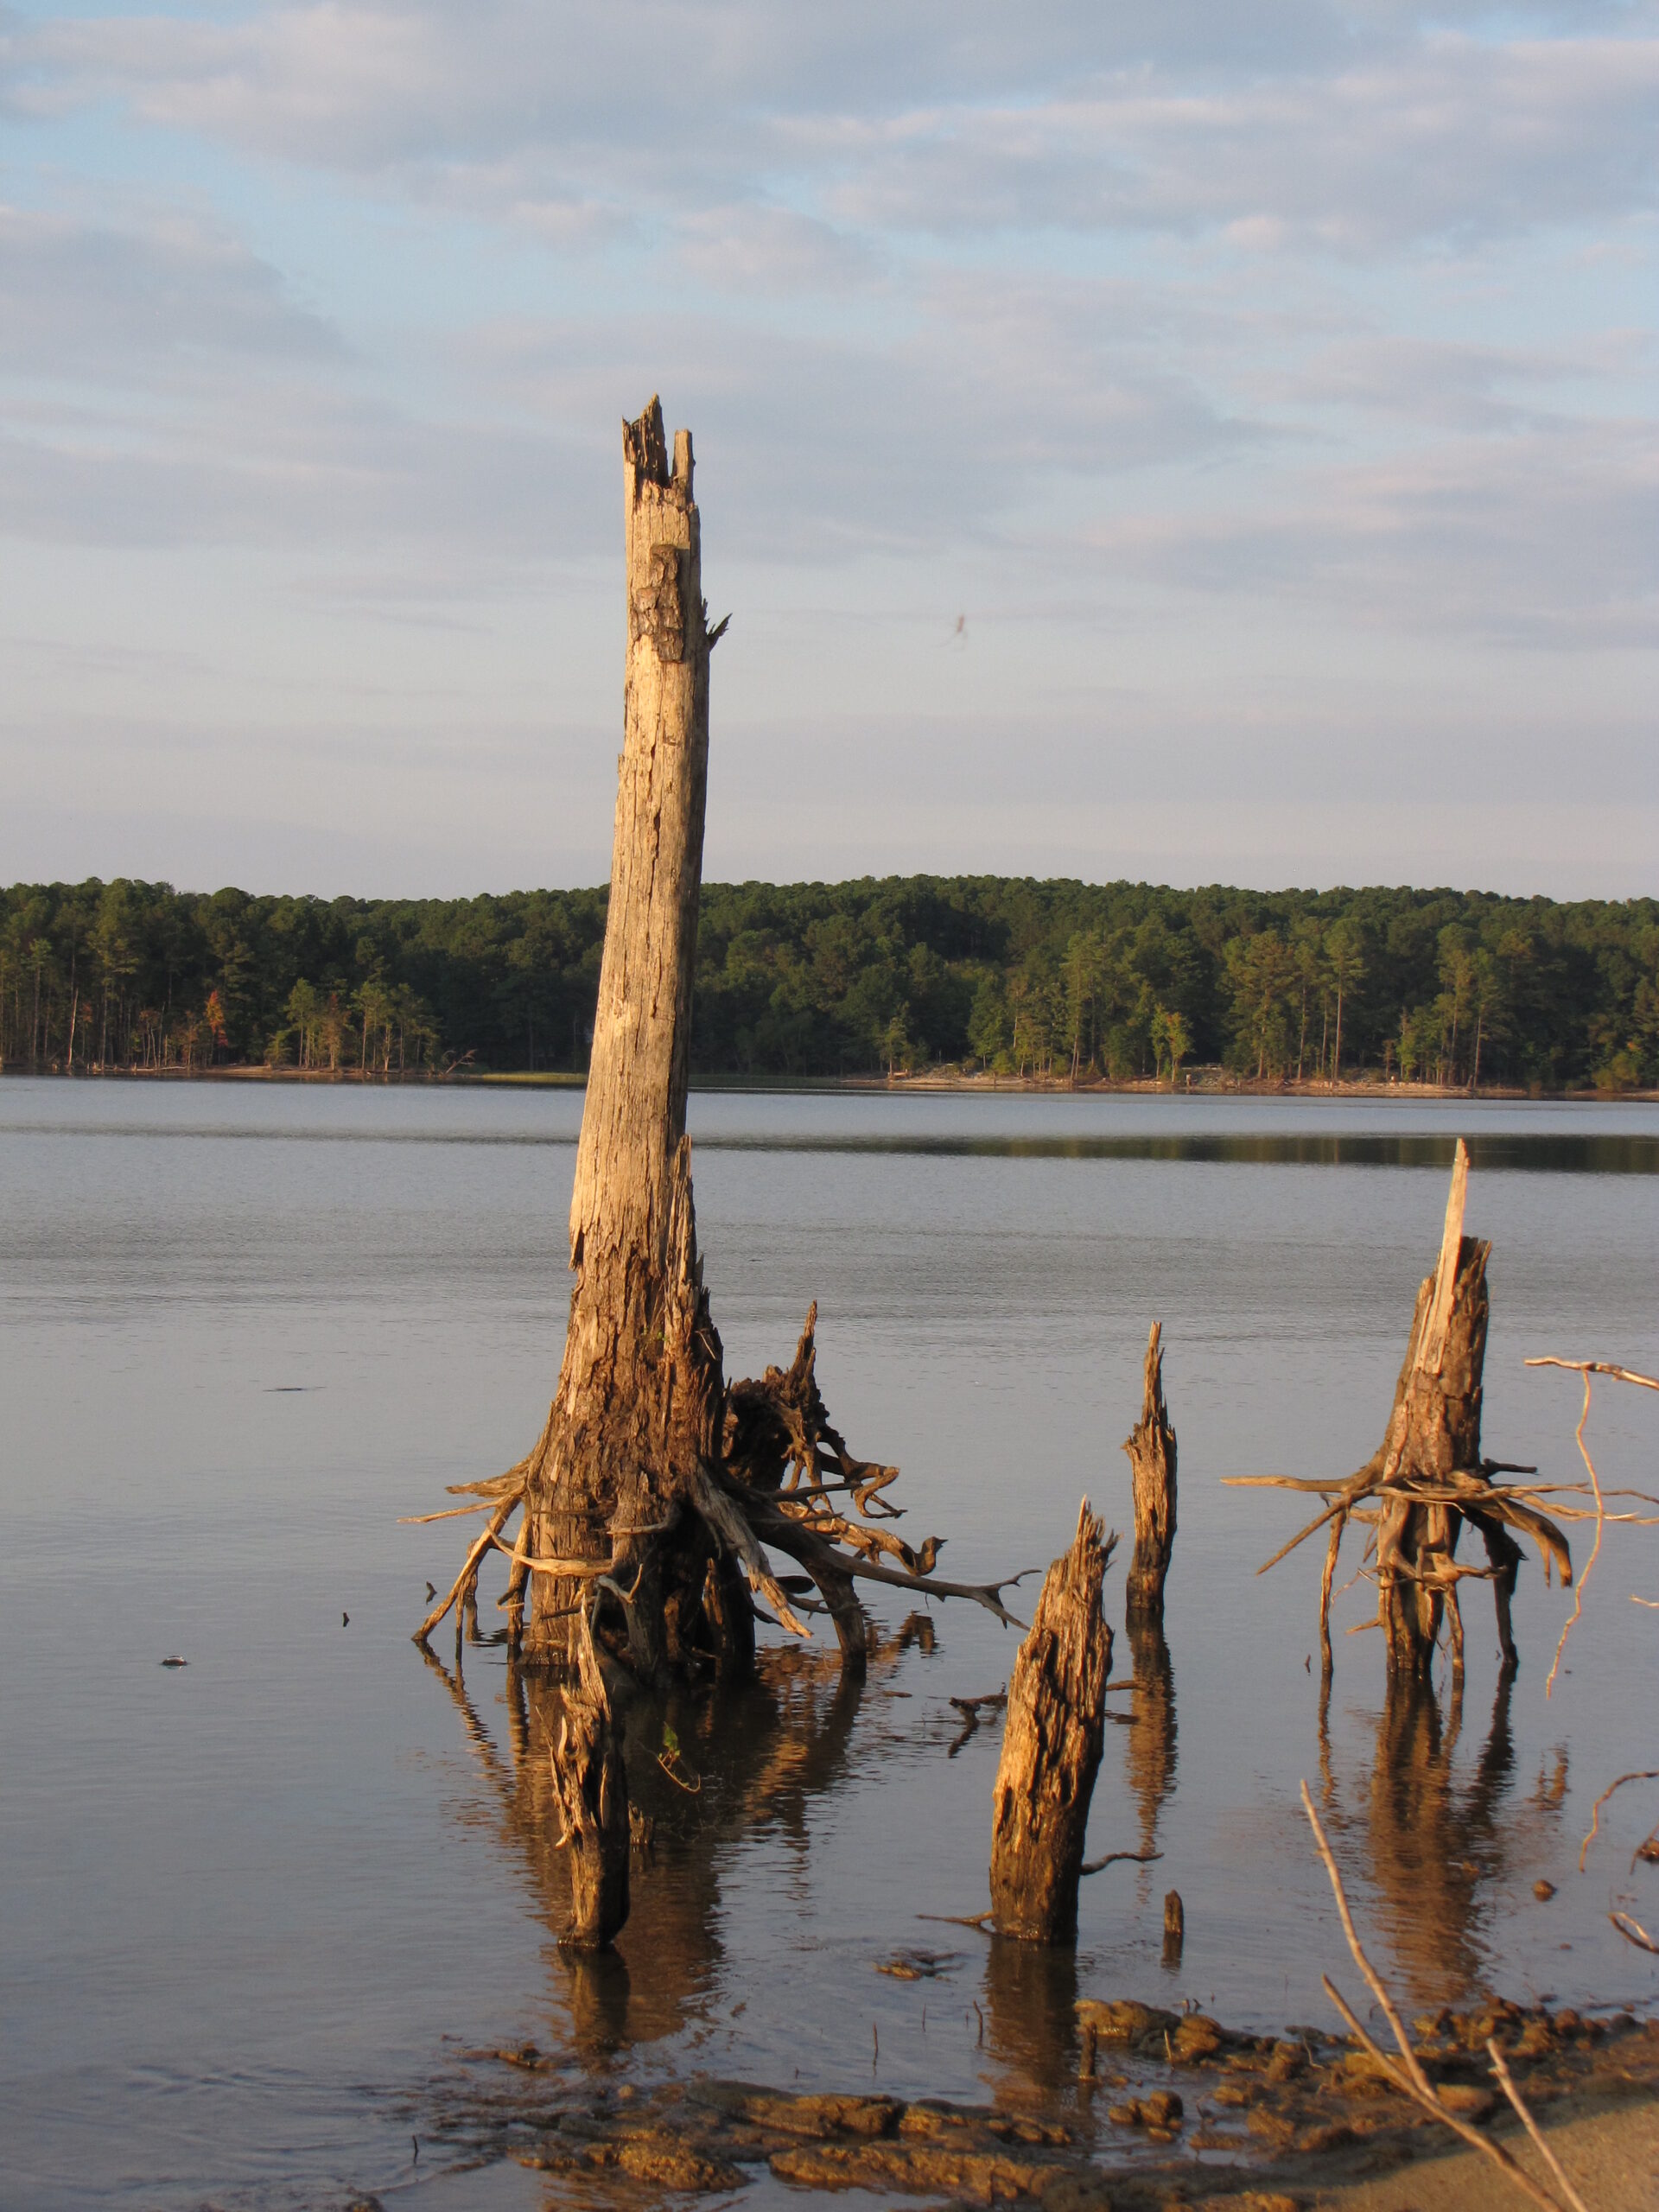 Jordan Lake State Recreation Area, courtesy of Gerry Dincher/CC BY-SA 2.0 (CreativeCommons.org)